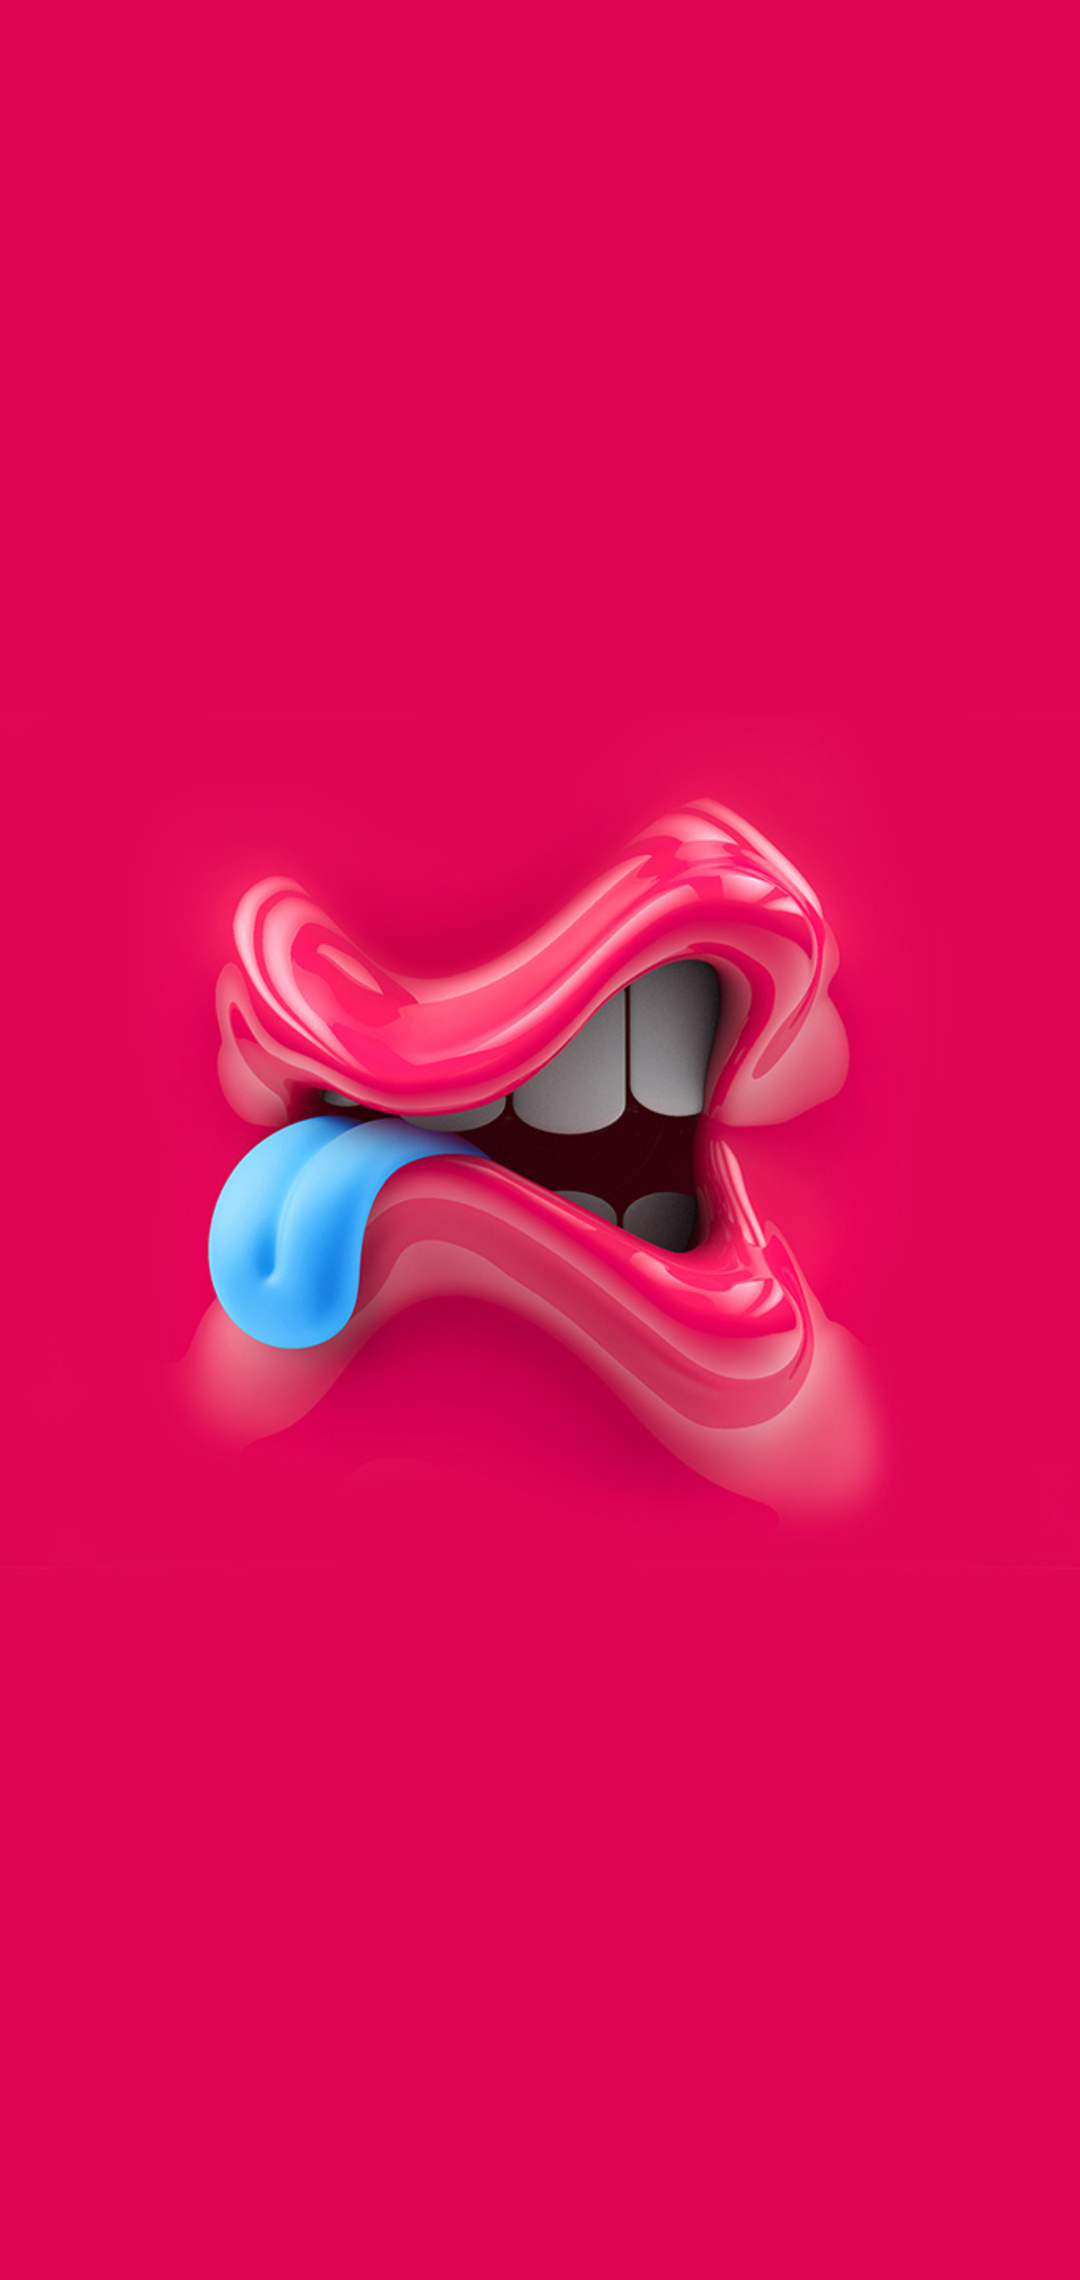 1080x2280 3d Tongue One Plus 6,Huawei p20,Honor view 10,Vivo y85,Oppo  f7,Xiaomi Mi A2 HD 4k Wallpapers, Images, Backgrounds, Photos and Pictures